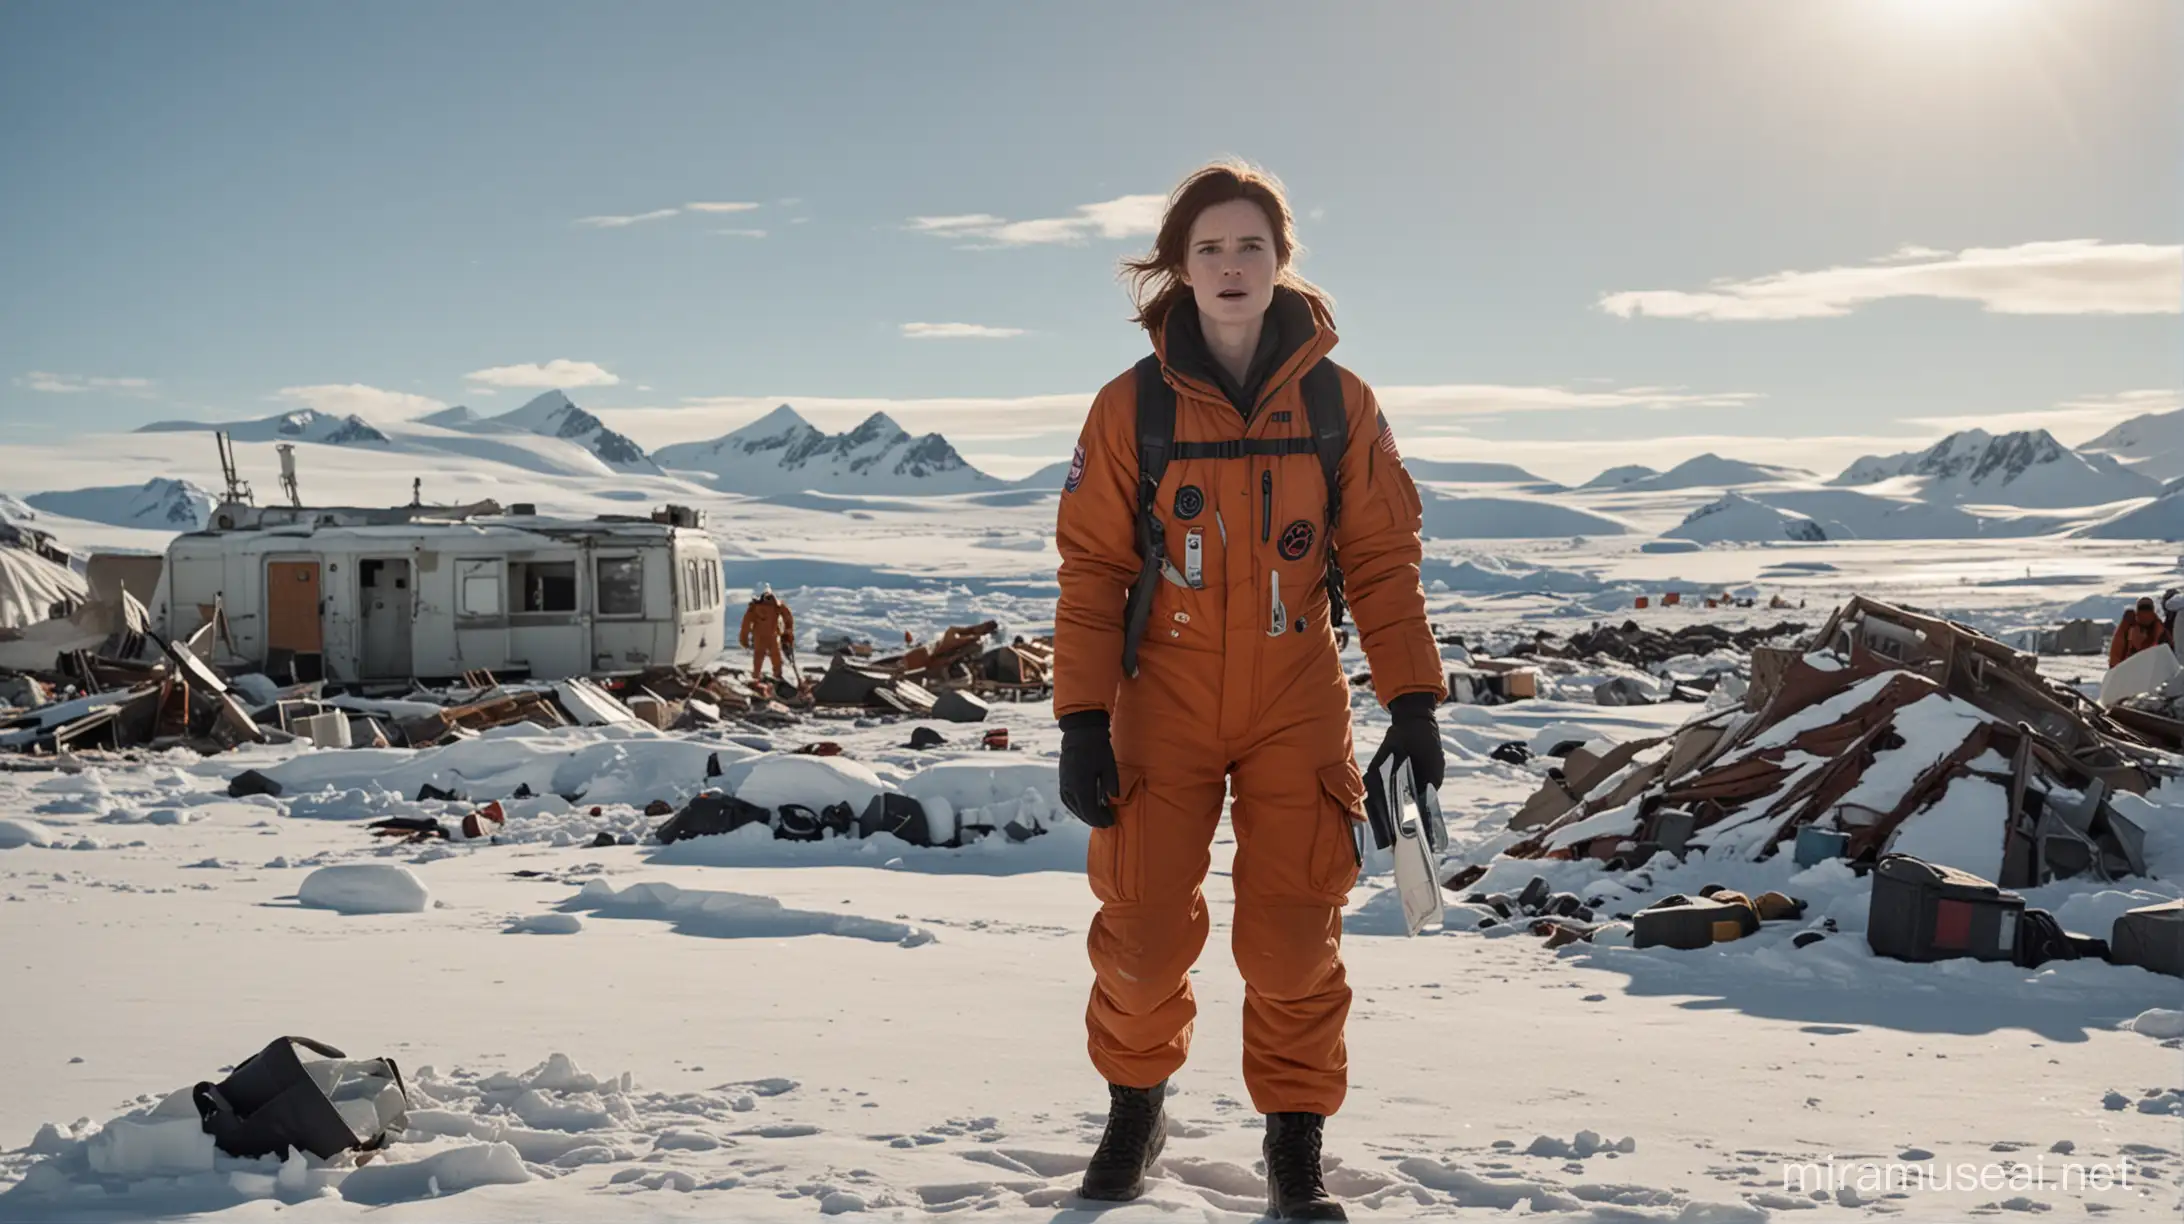 cinematic still, film by john carpenter, the thing, antarctica, low winter sun, pedro pascal, snowsuit, helecopter, rose leslie holding medical kit, destroyed buildings in background